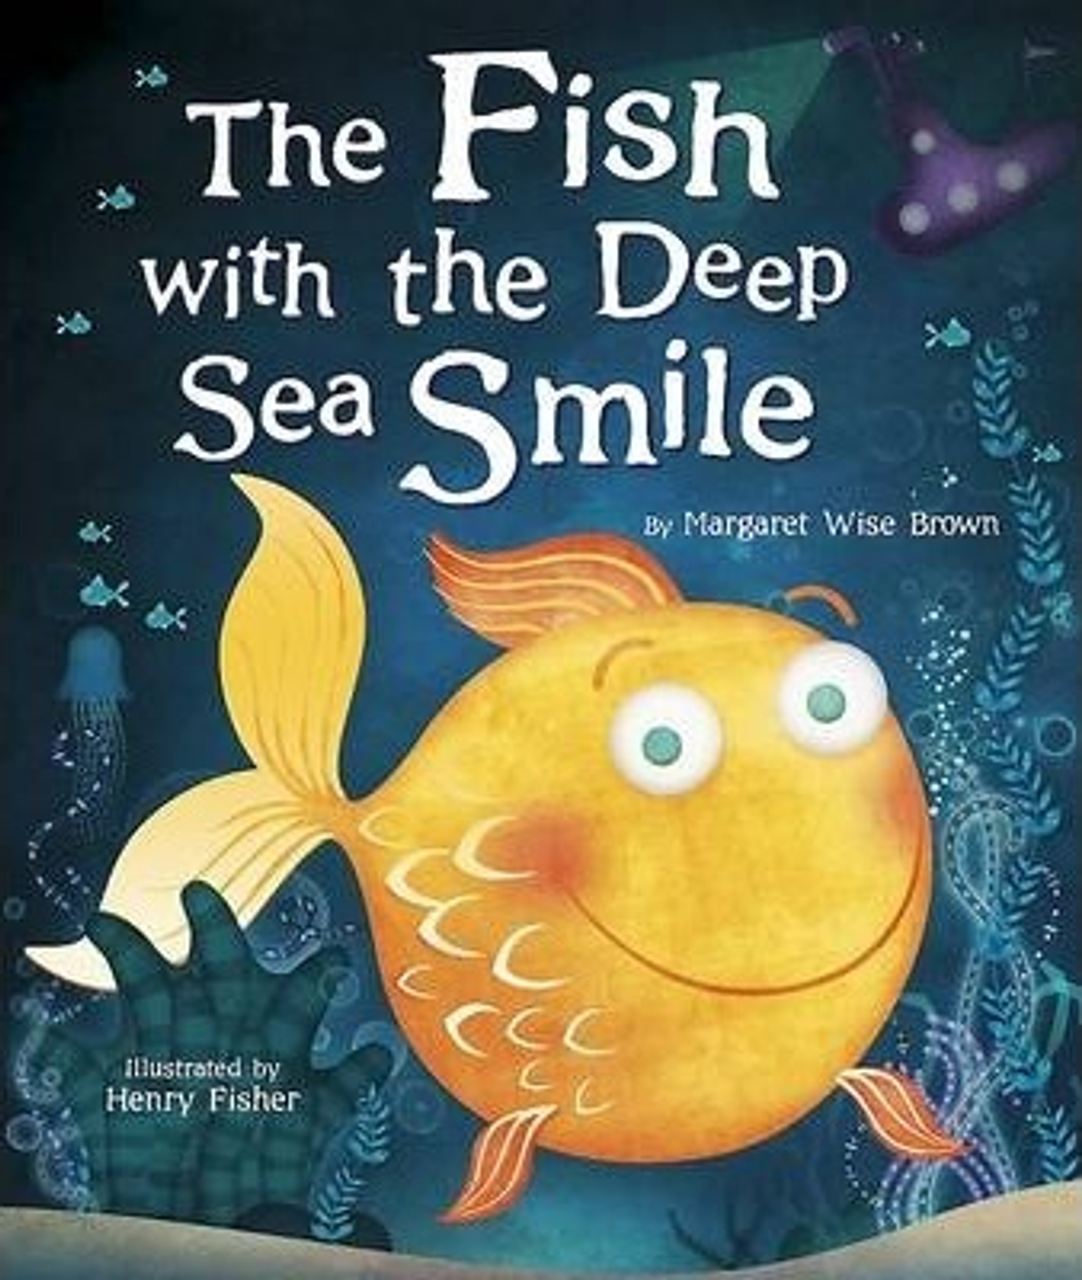 The Fish with the Deep Sea Smile (Children's Picture Book)